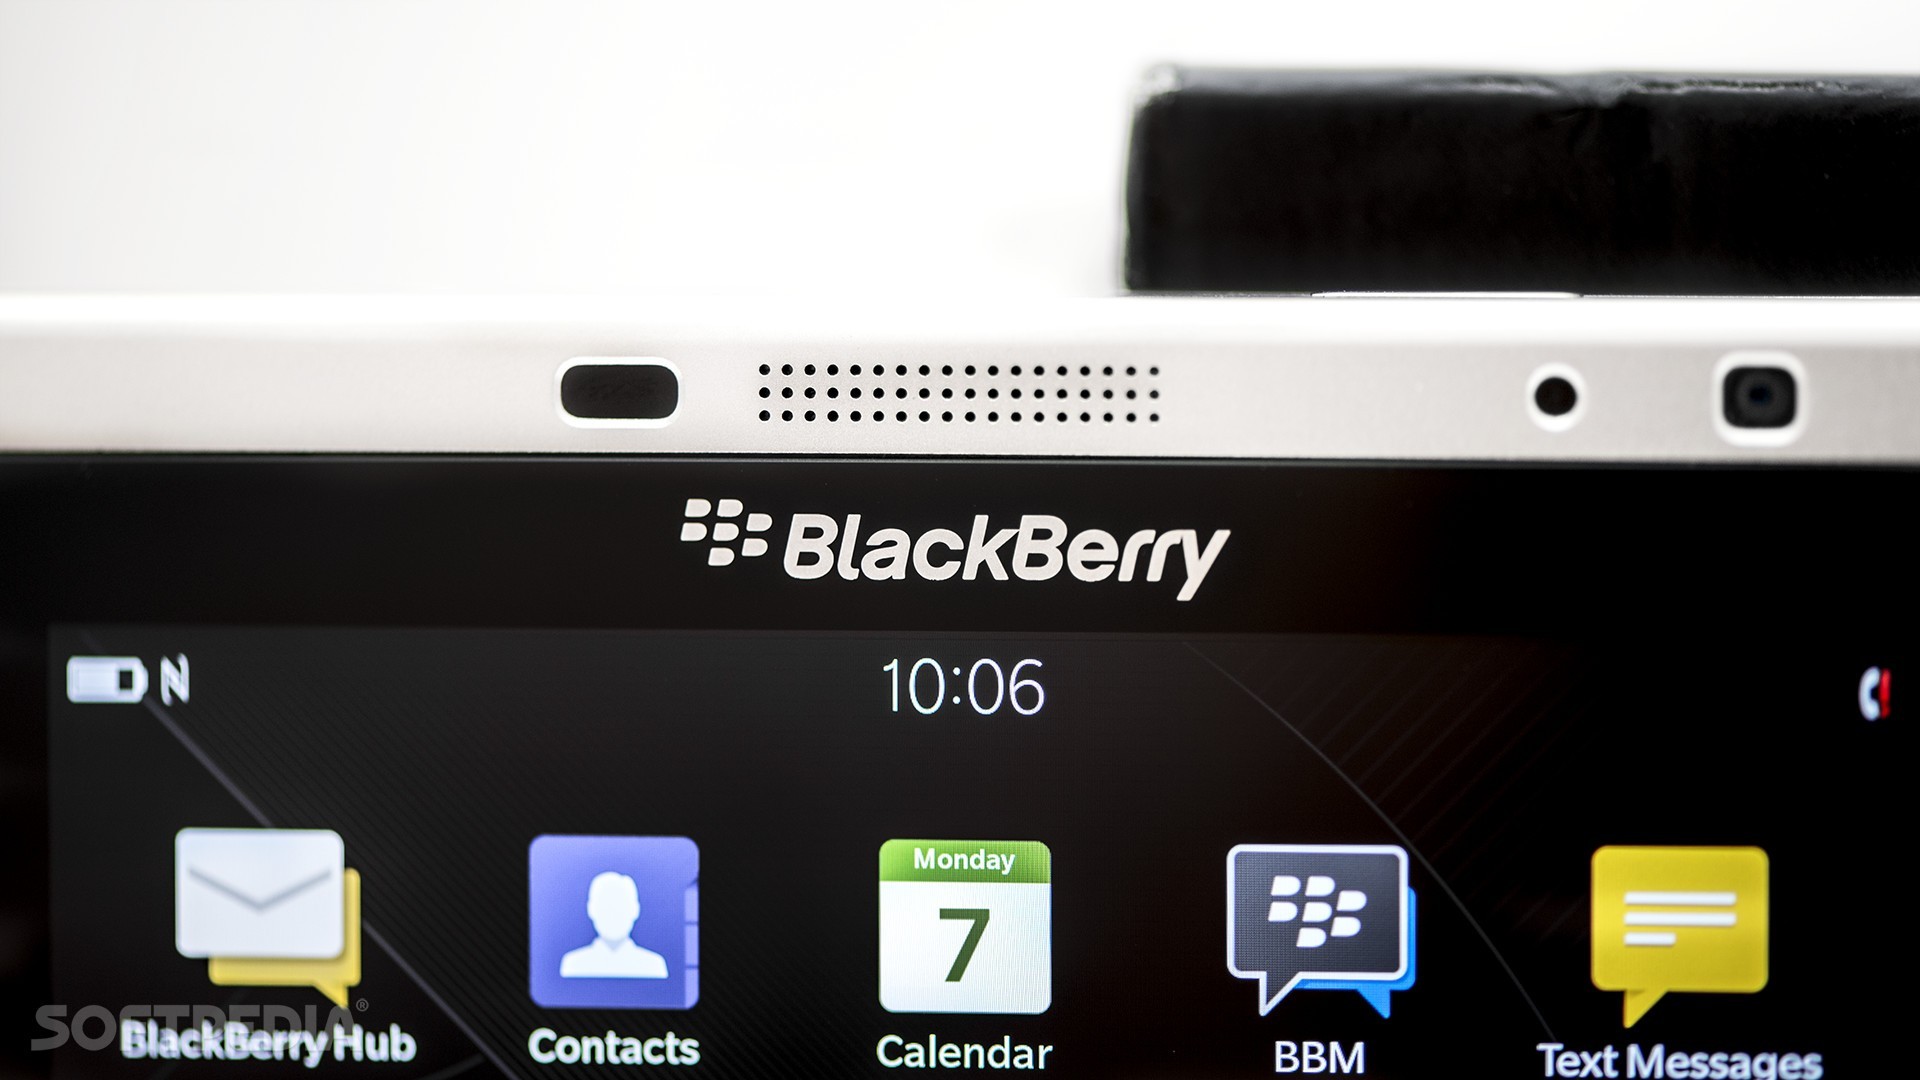 No 5G BlackBerry Planned as TCL Says 5G Is More Appropriate for Refrigerators